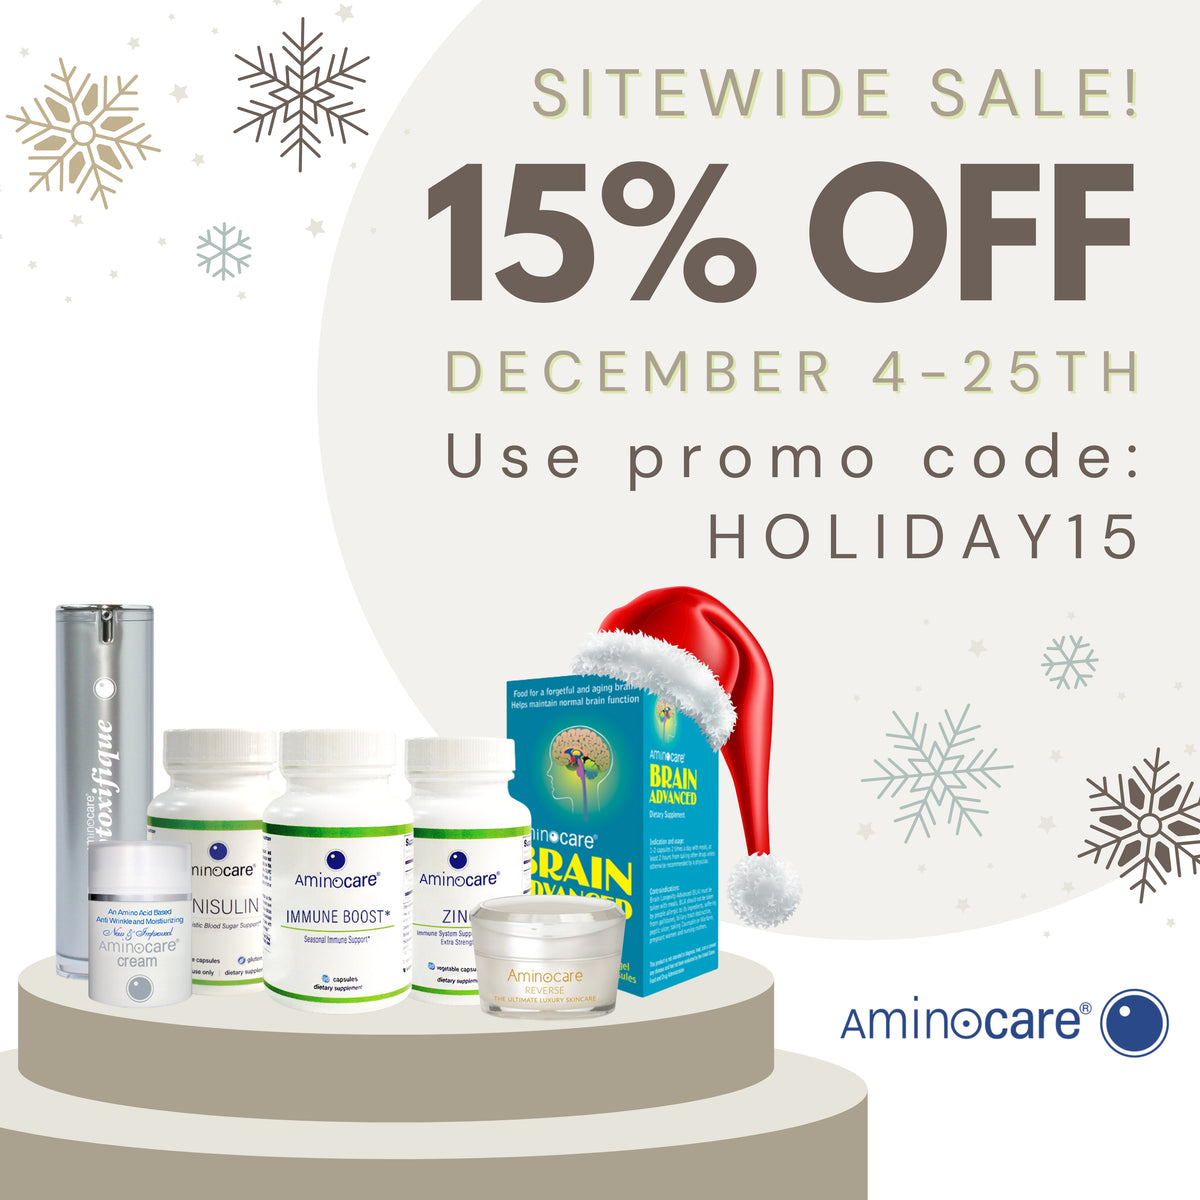 Holiday Sitewide Sale for Aminocare® Health and Wellness Products